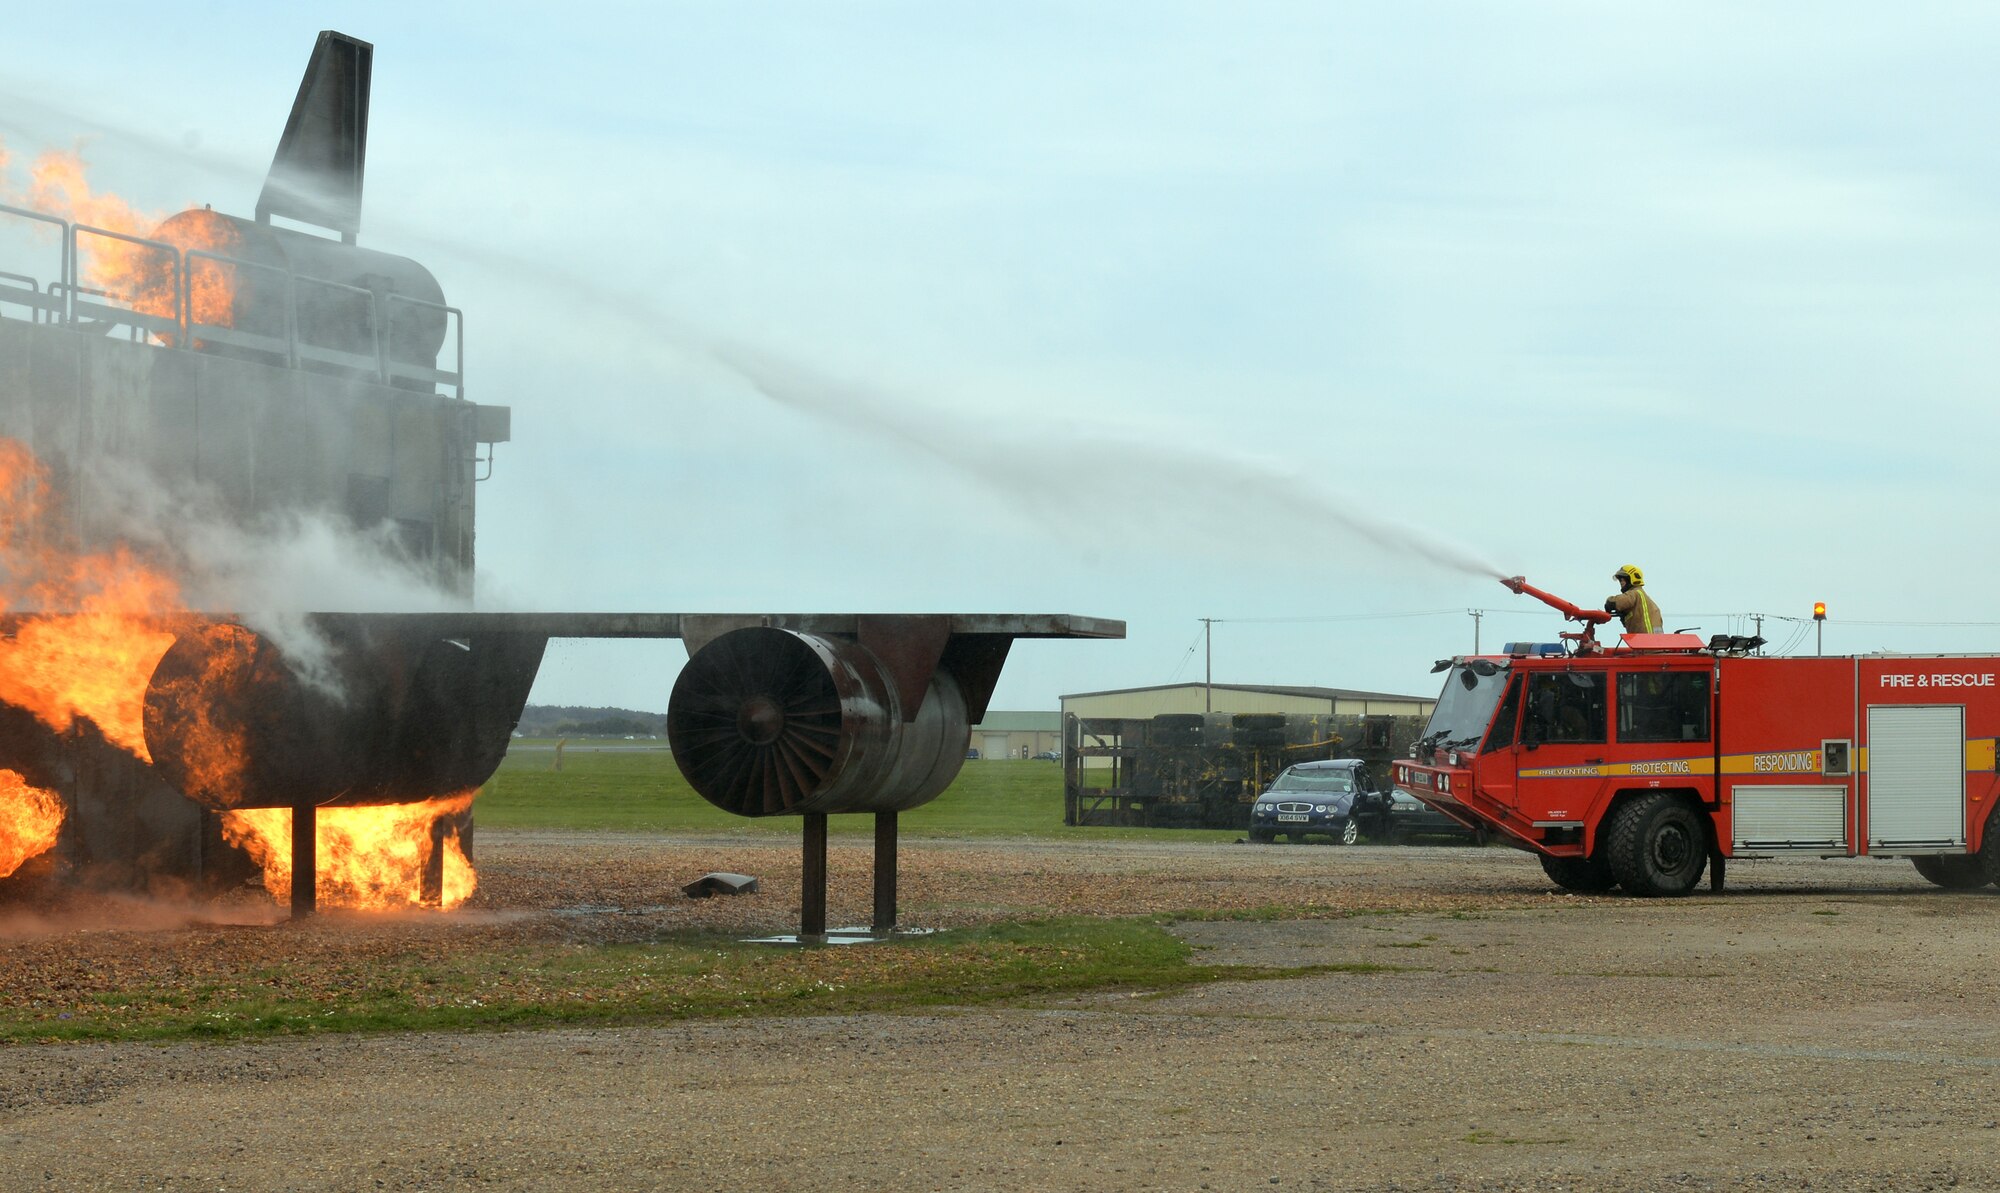 A firefighter from RAF Marham sprays water from a Royal Air Force fire truck onto a mock aircraft fire at the live fire training area on RAF Mildenhall, England, April 5, 2019. The British fire crew visited the base to gain experience on the live fire trainer. With the arrival of the F-35 and the regeneration at RAF Marham, their training facilities are under renovation and the visit served to provide vital training for the RAF firefighters and aid in continuing to build vital working relationships between RAF Mildenhall and neighboring fire departments. (U.S. Air Force photo by Karen Abeyasekere)